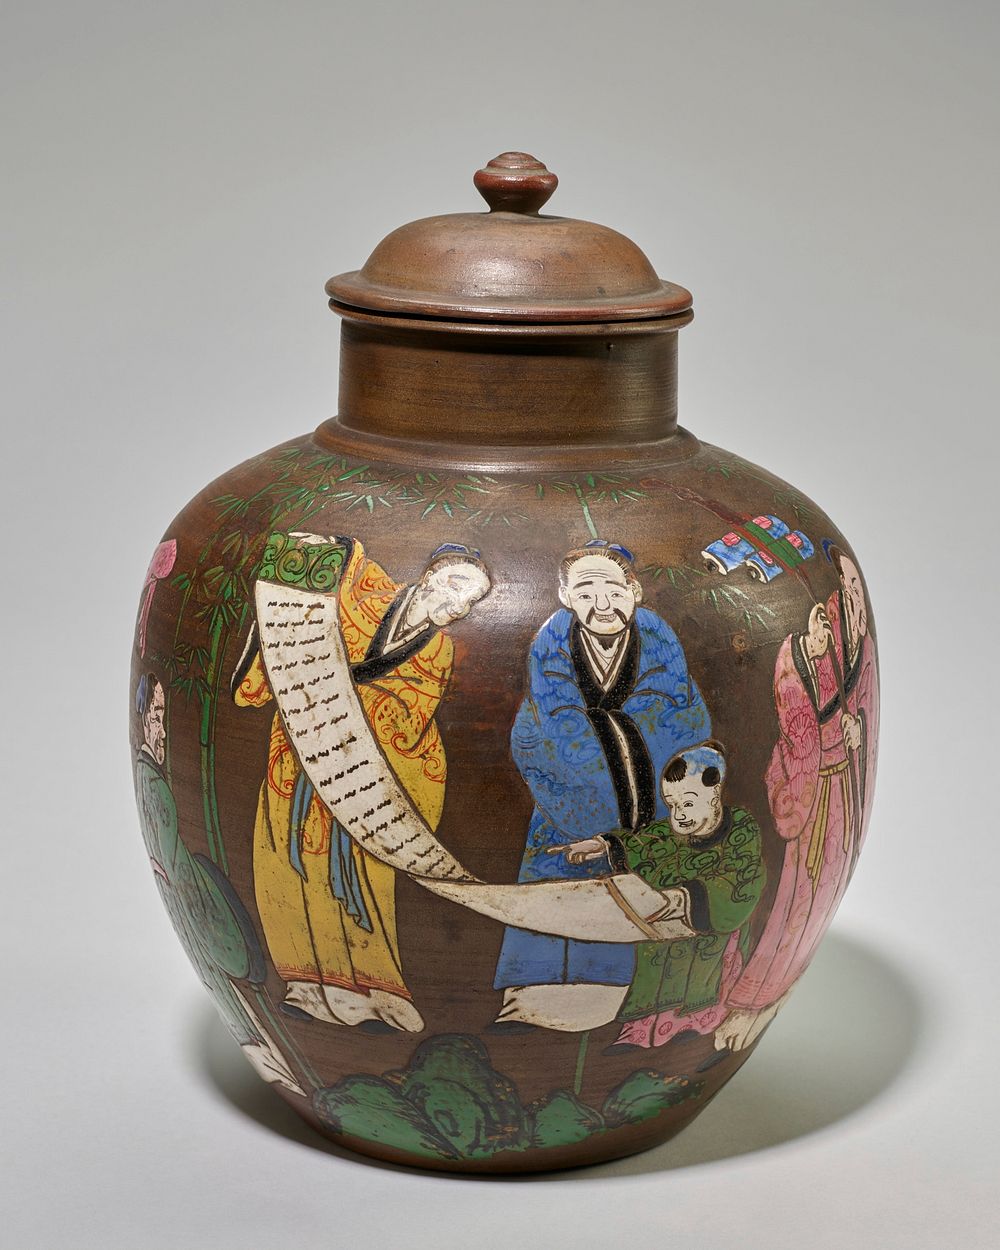 Jar, covered, decorated in enamel in Seven Wise Men design. Original from the Minneapolis Institute of Art.